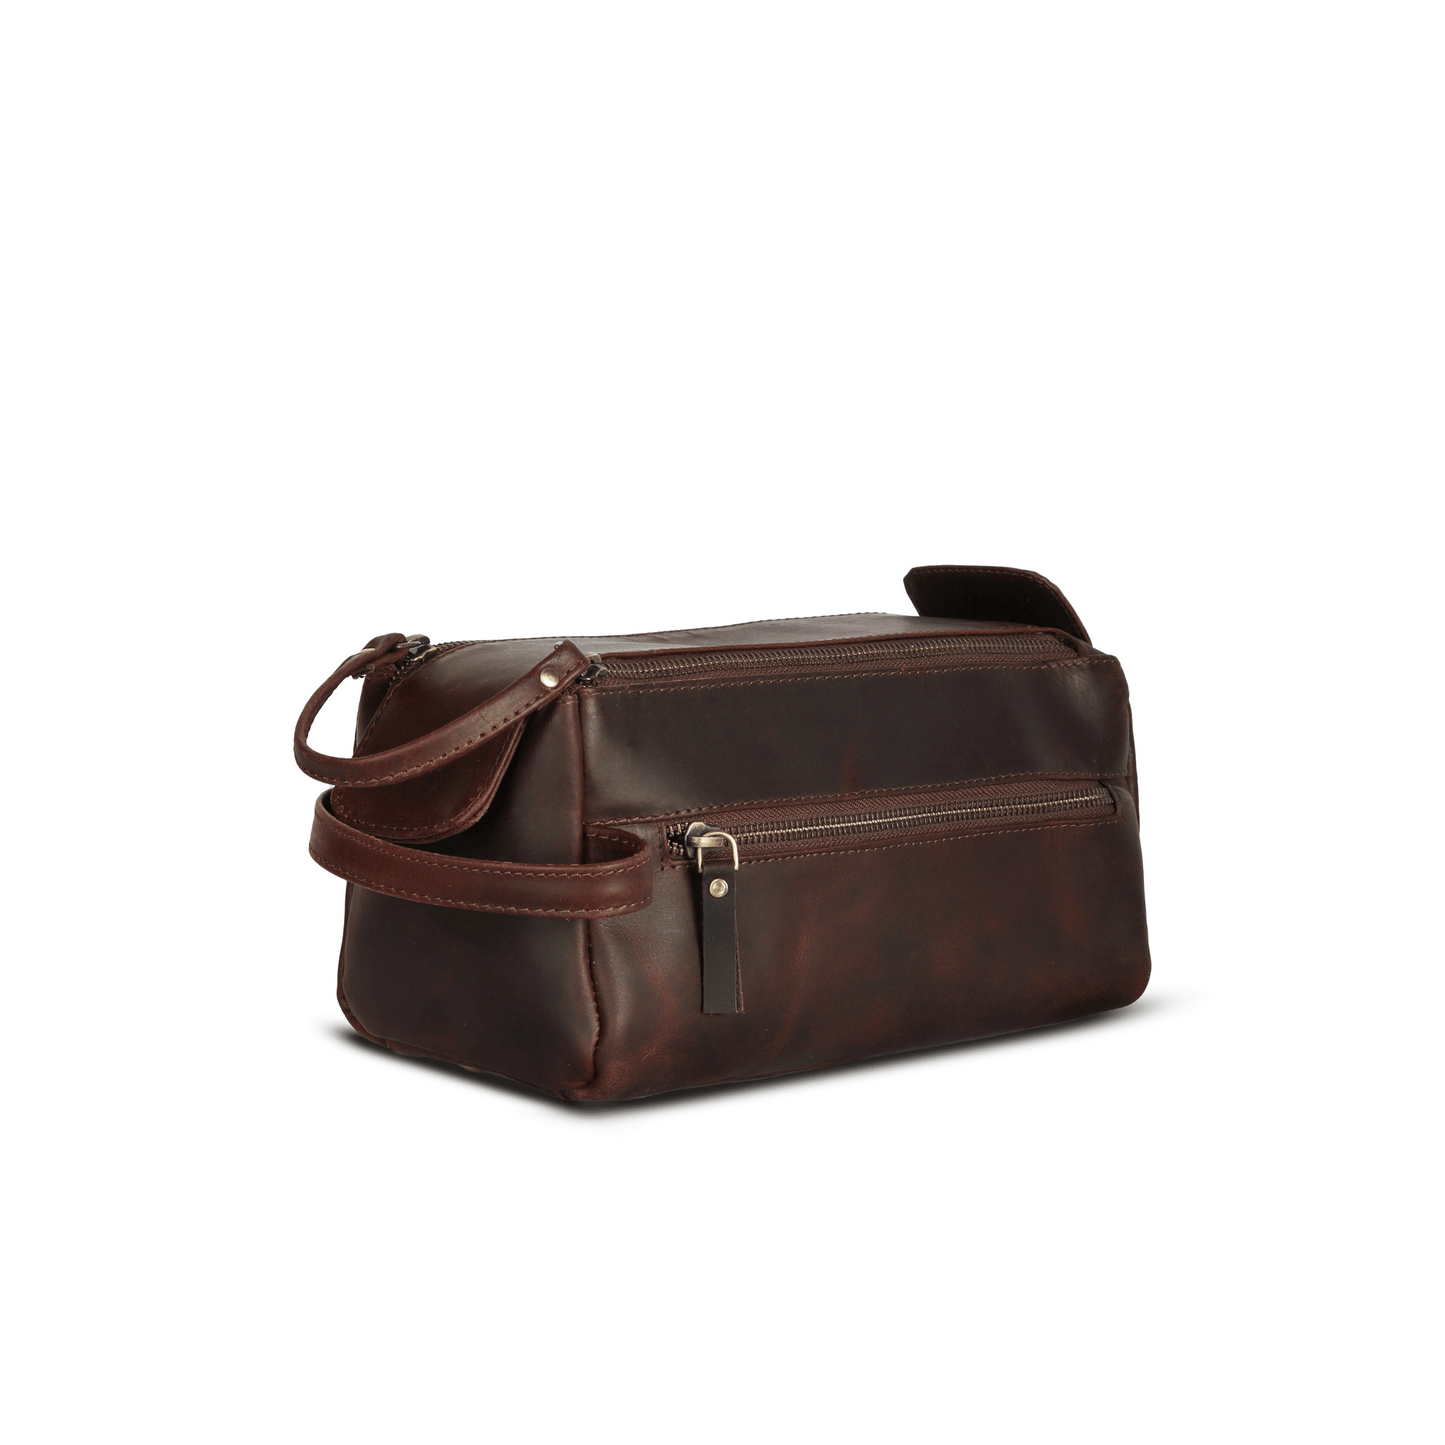 Travel Mate Genuine Leather Tolietry Bag Muddy Brown